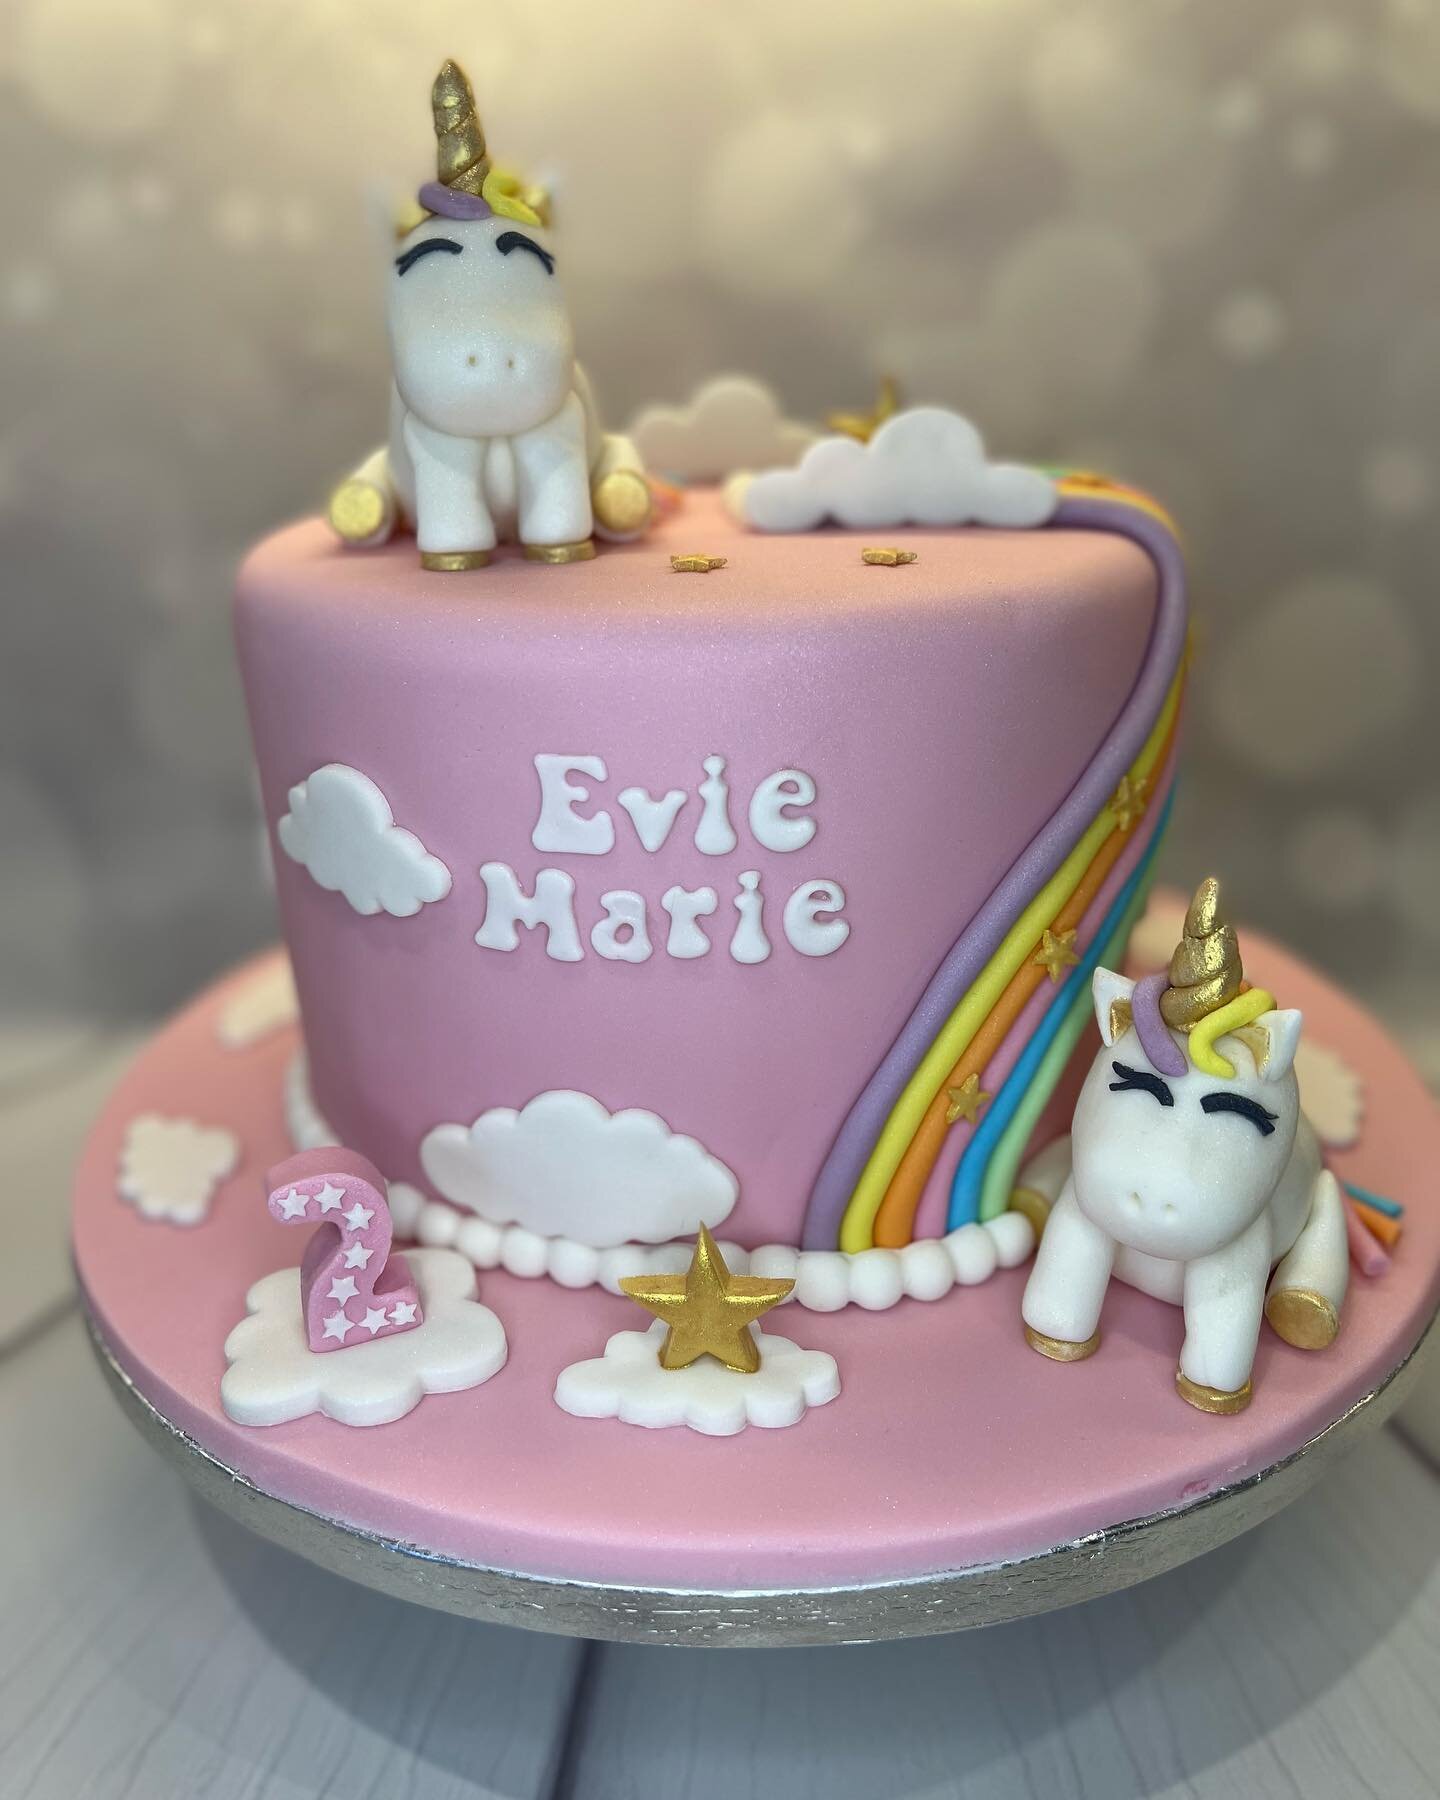 This week&rsquo;s cake was for a special little lady Evie Marie who was 2.  The cake was white chocolate cake and frosting with fresh raspberries.  Hope you had a lovely party Evie Marie.  Xxx